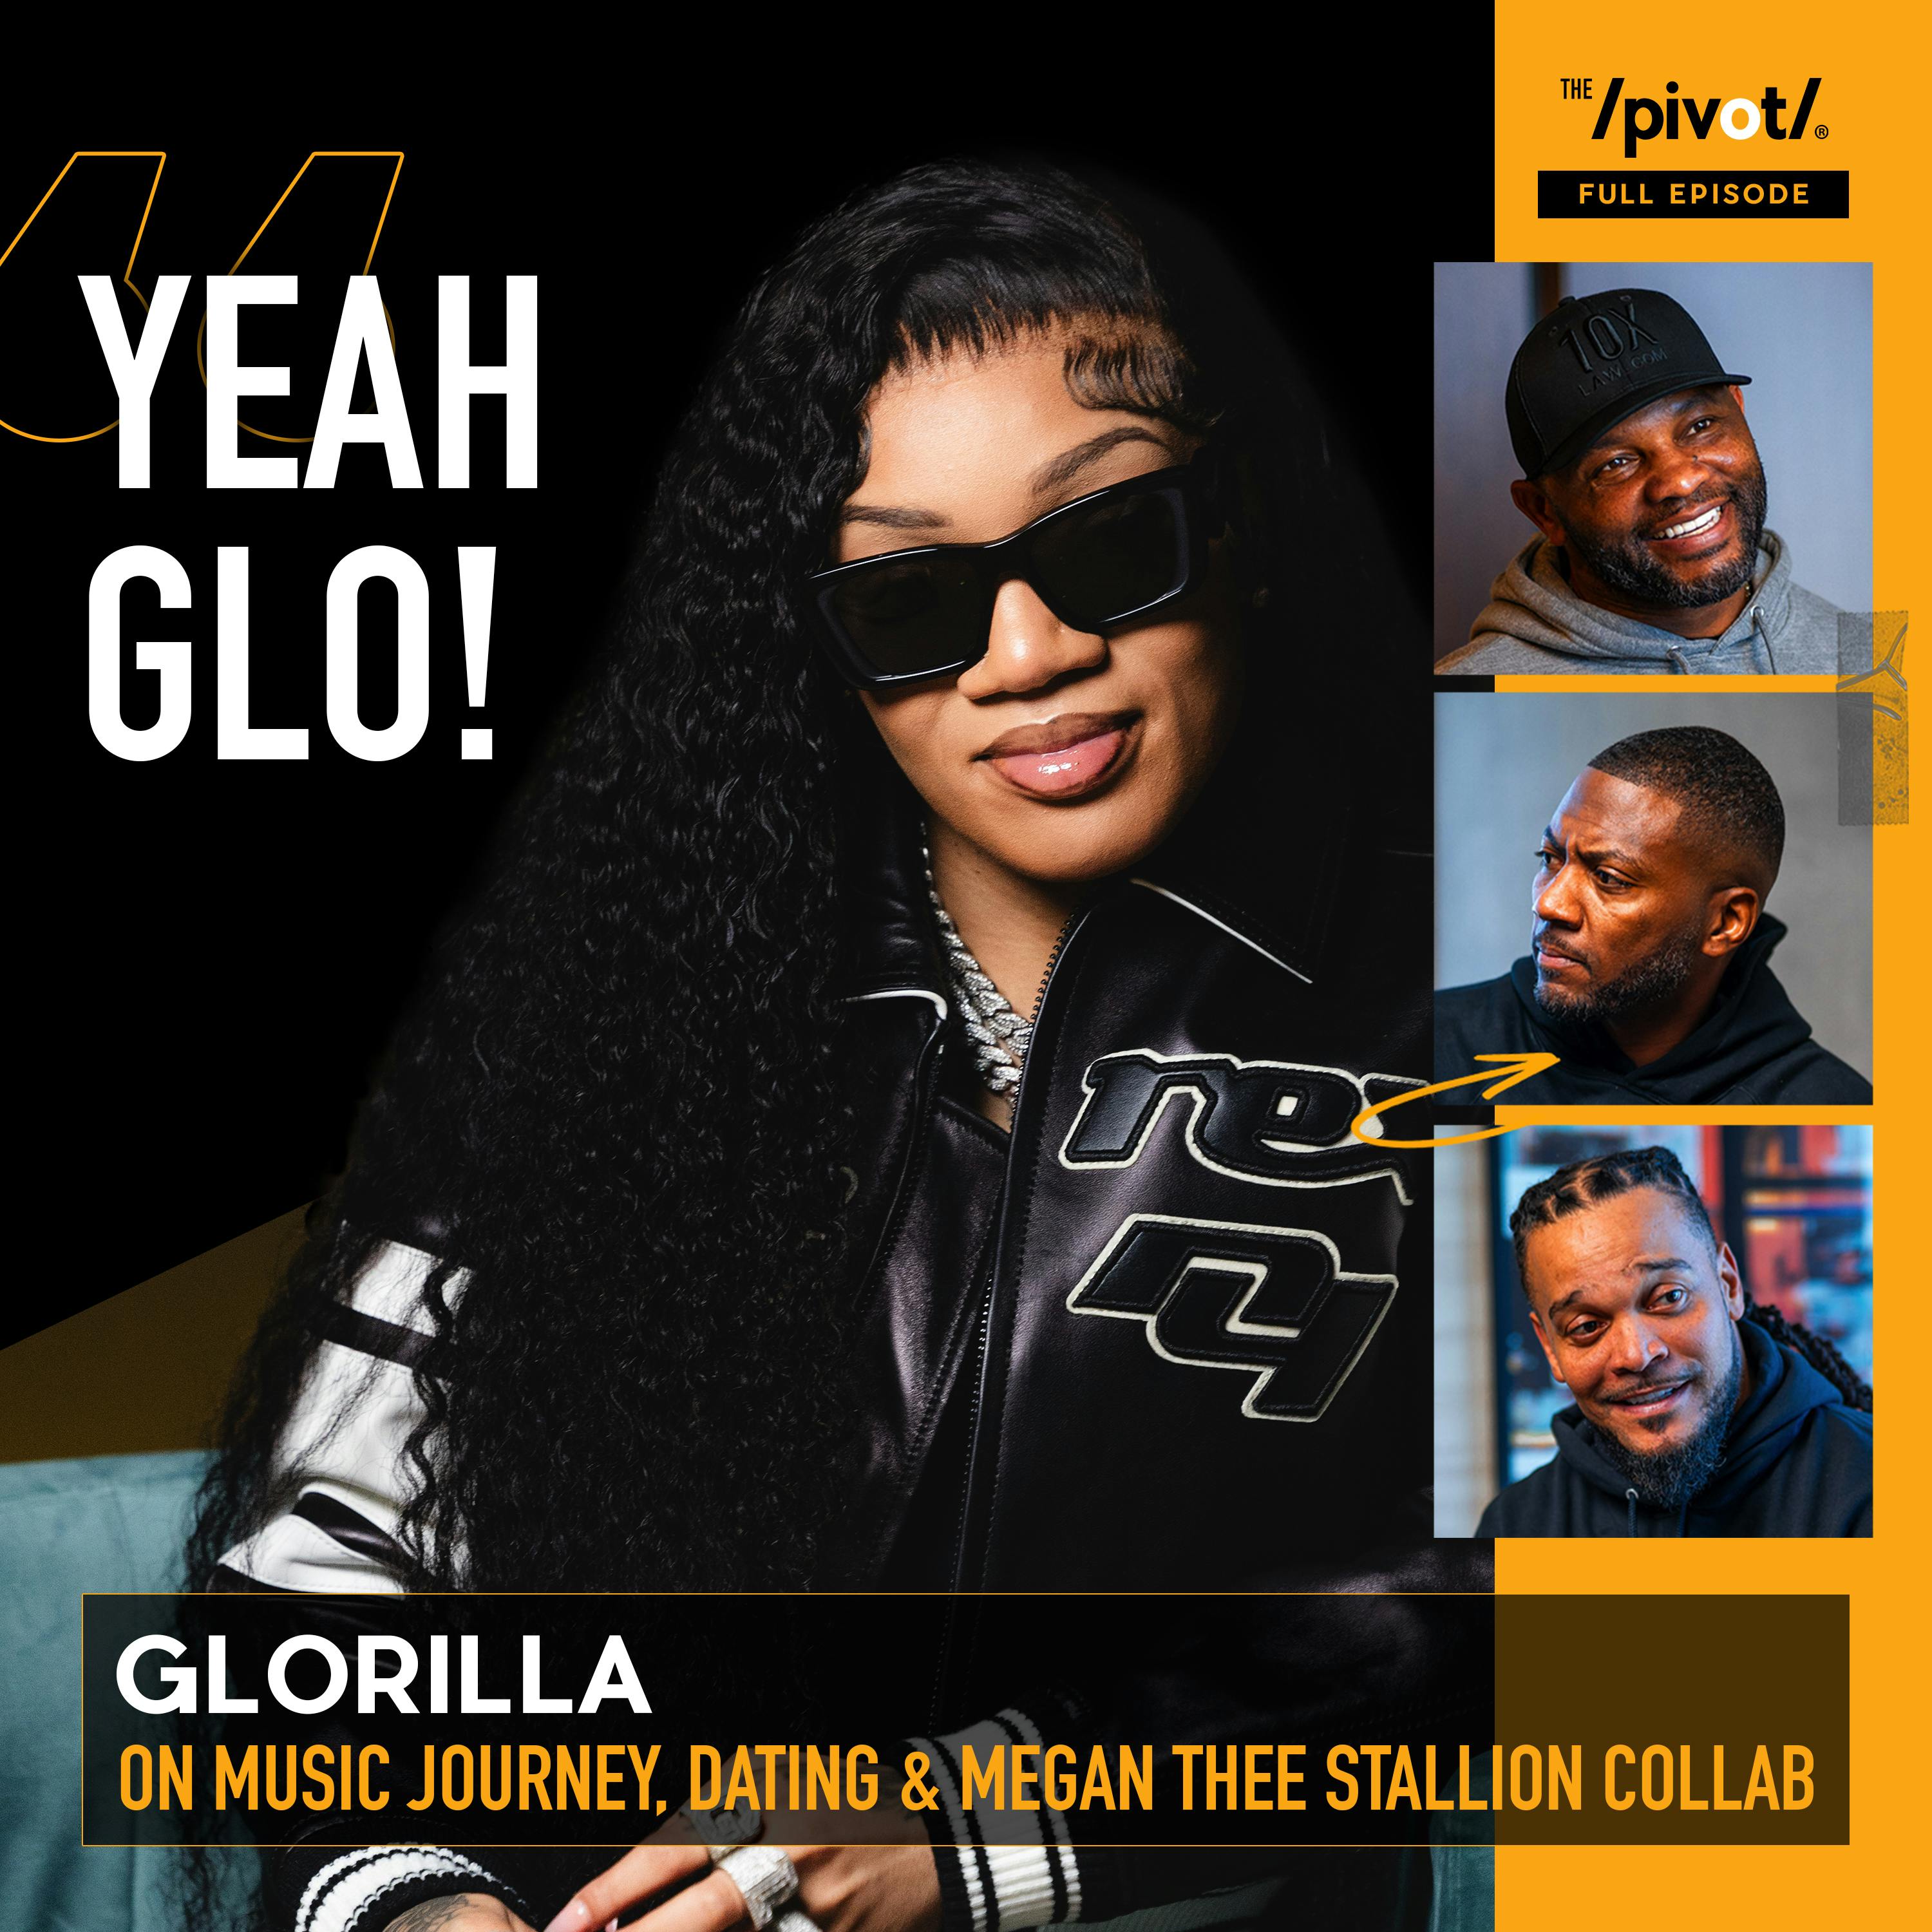 GloRilla on journey into music, heartbreak, dating philosophy, relationship with her dad, the Steelers and meeting Mike Tomlin and talks about release of new mixtape featuring Megan Thee Stallion